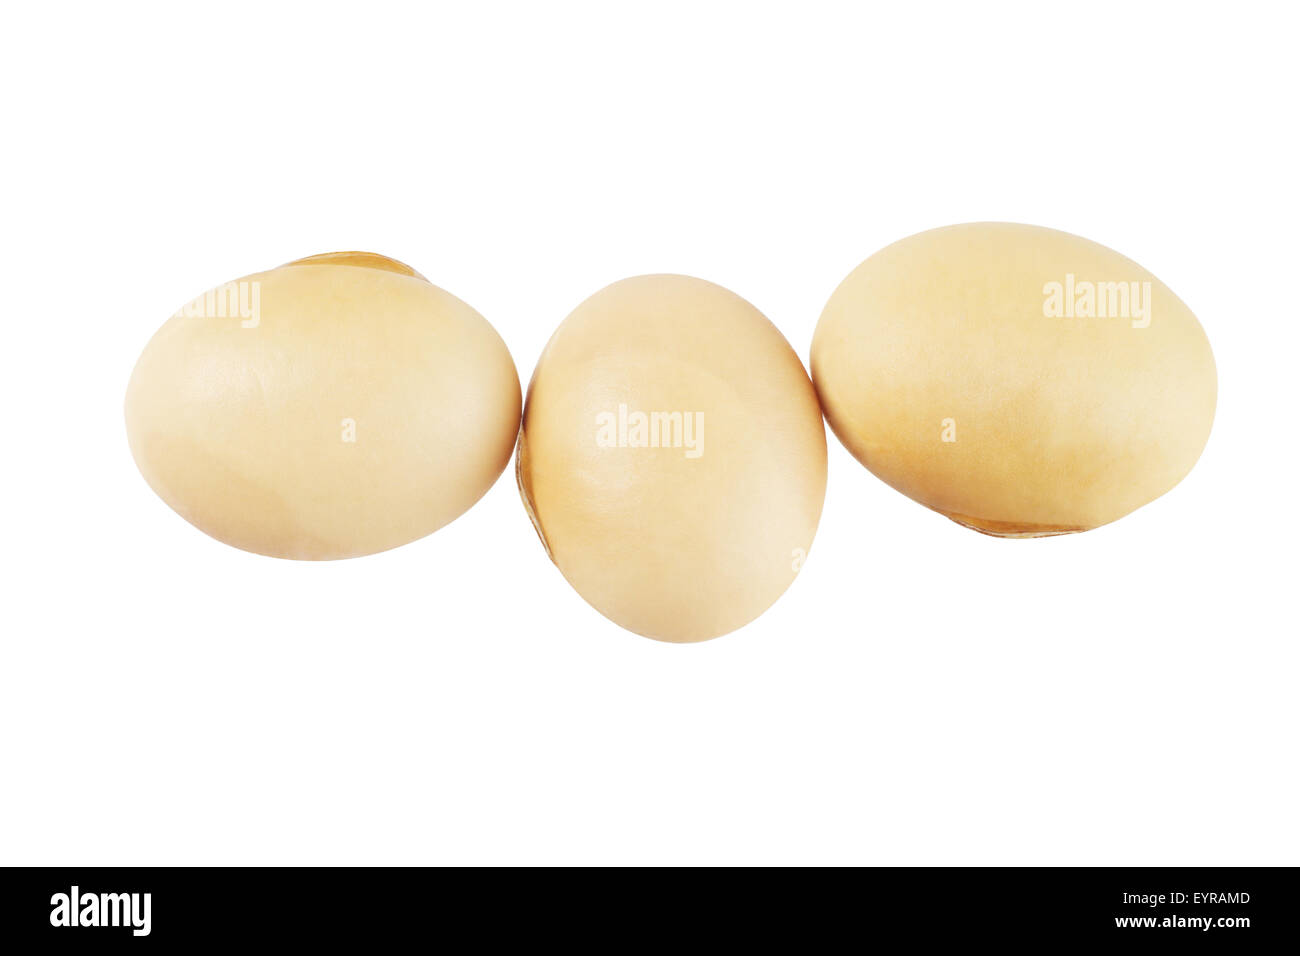 Row of Three Soy Beans on White Background Stock Photo